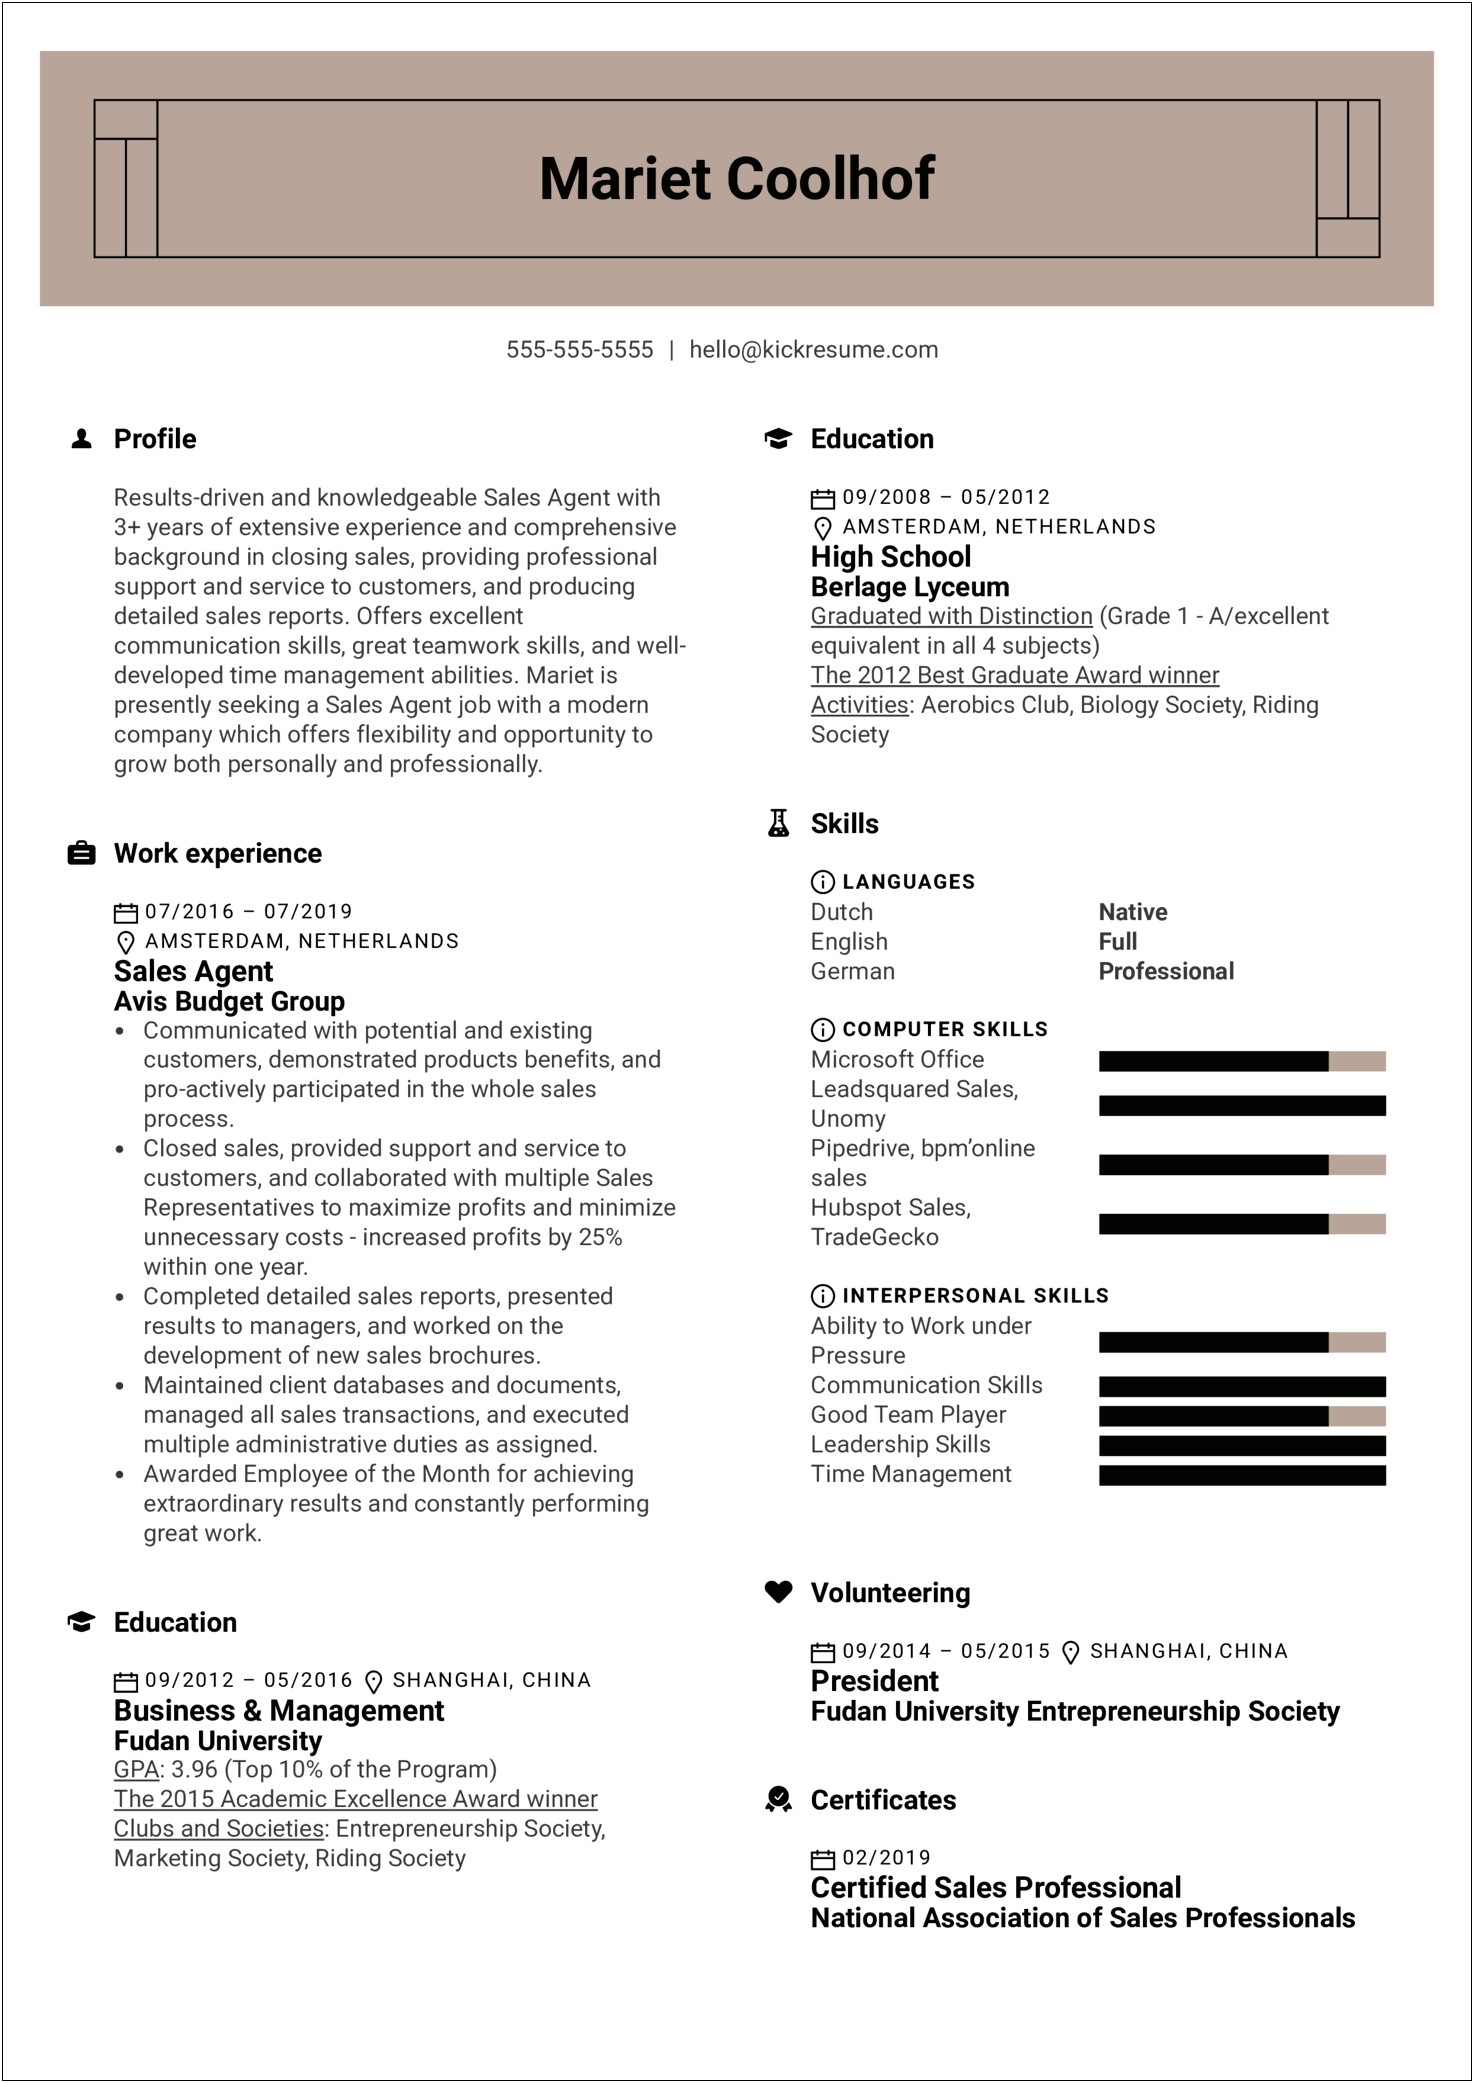 Professional Skills In Biology For Resume